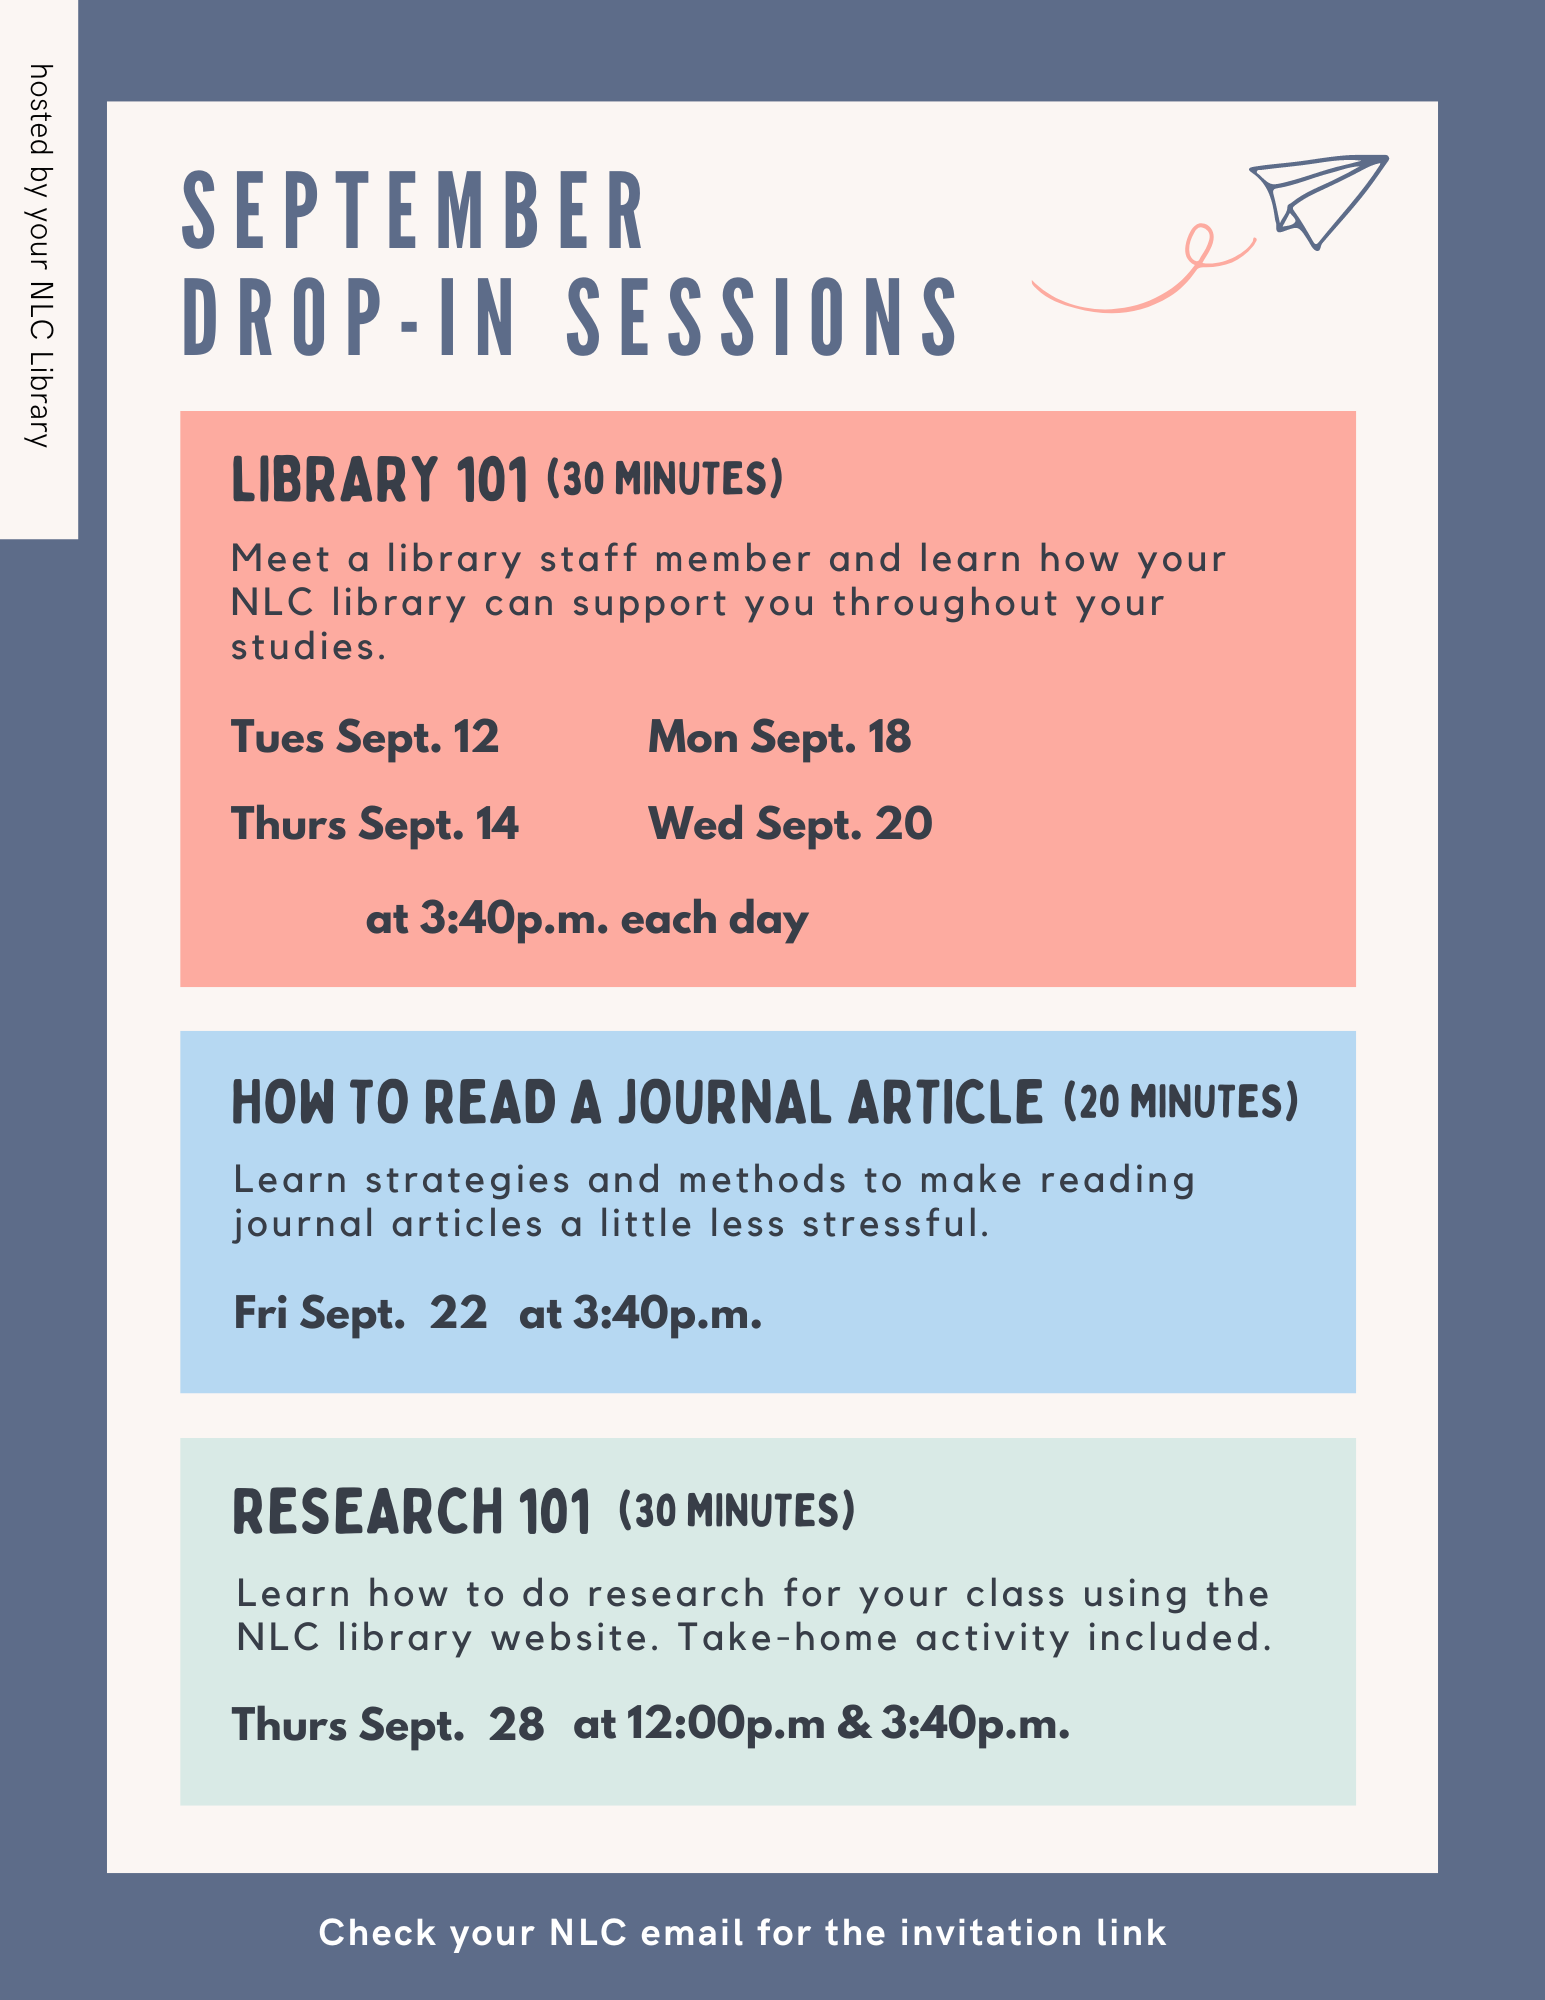 Library 101 September 12th, 14th, 18th, and 20th from 3:40pm to 4:10pm. How to Read a Journal Article September 22nd from 3:40pm to 4:00pm. Research 101 September 28th from 12:00pm to 12:30pm and from 3:40pm to 4:10pm